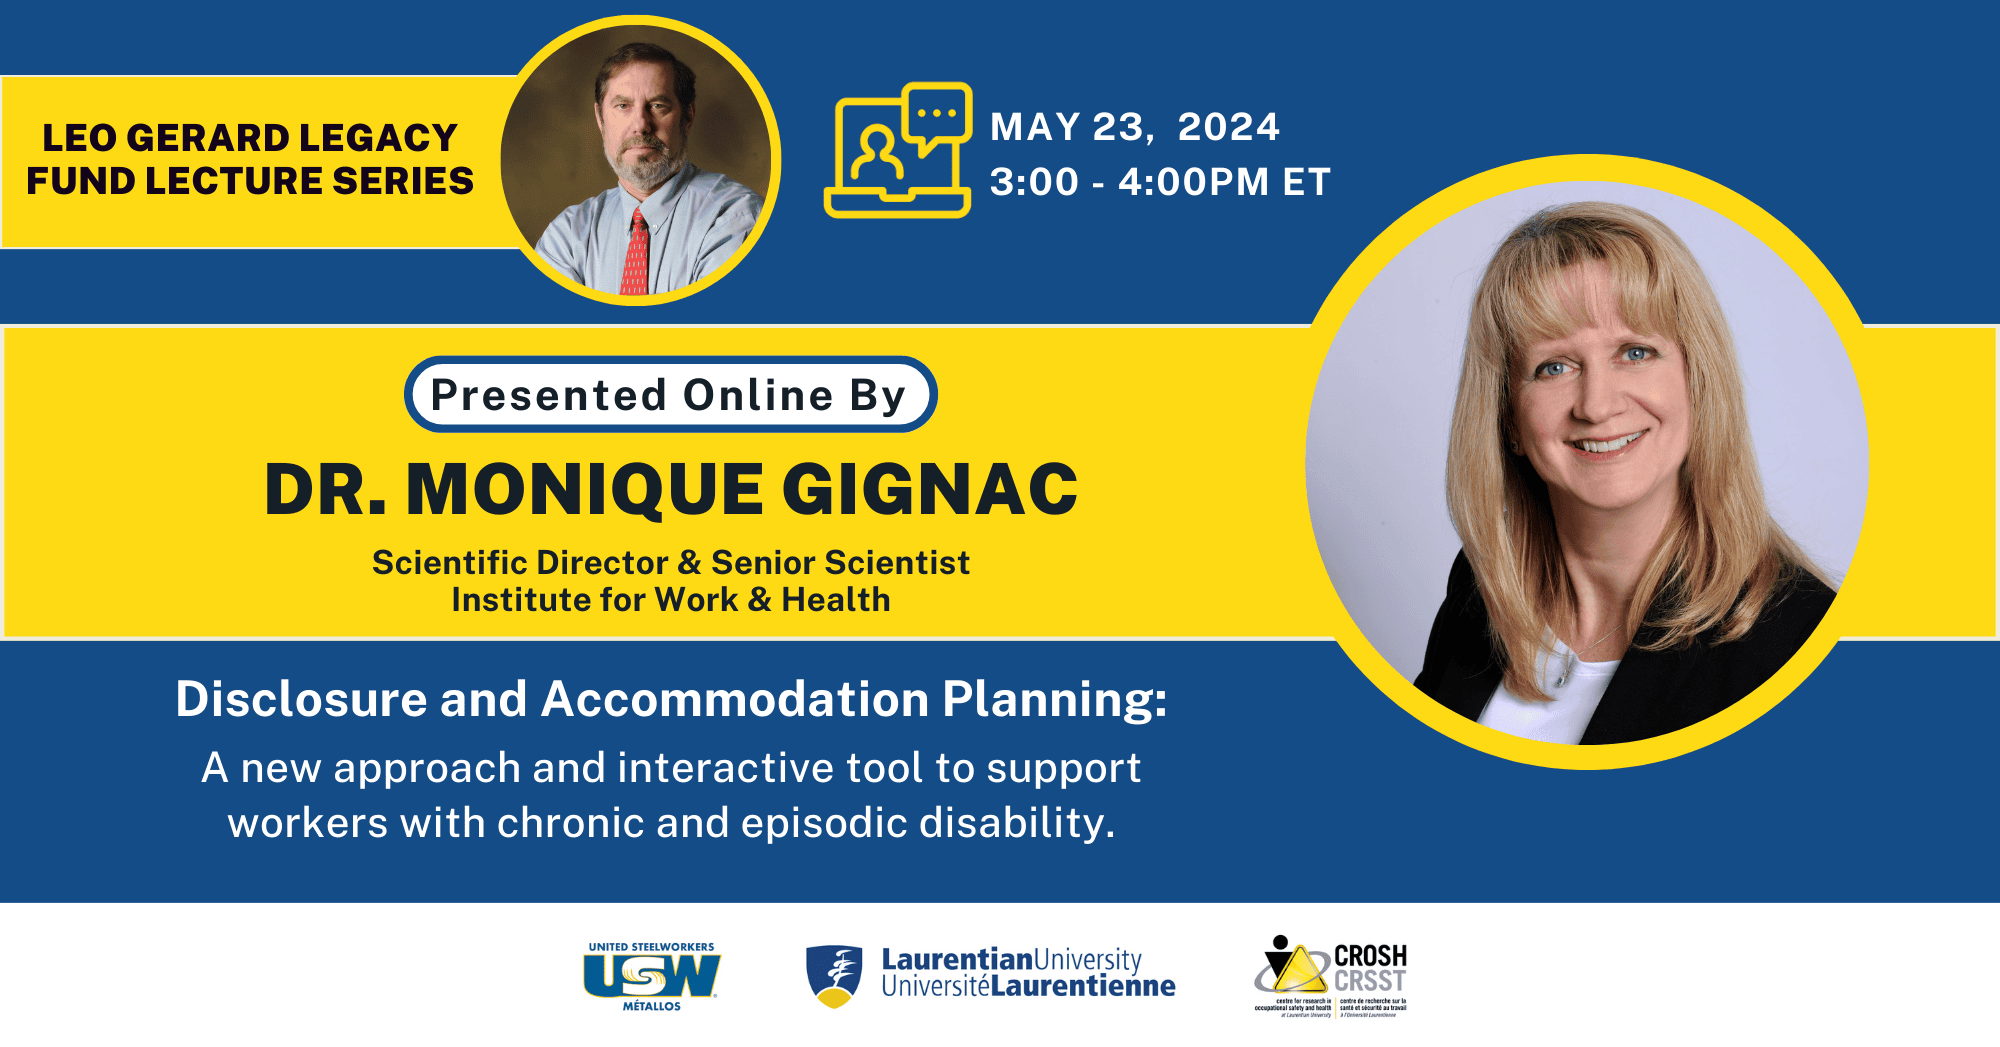 Text that reads "Leo Gerard Legacy Fund Lecture Series. Disclosure and Accommodation Planning: A new approach and interactive tool to support workers with chronic and episodic disability. May 23, 2024, 3:00 - 4:00PM ET. Presented by Dr. Monique Gignac, Scientific Director and Senior Scientist, Institute for Work and Health. Photo of Dr. Monique Gignac and Mr. Leo Gerard. Logos of United Steelworkers, Laurentian University, and CROSH.